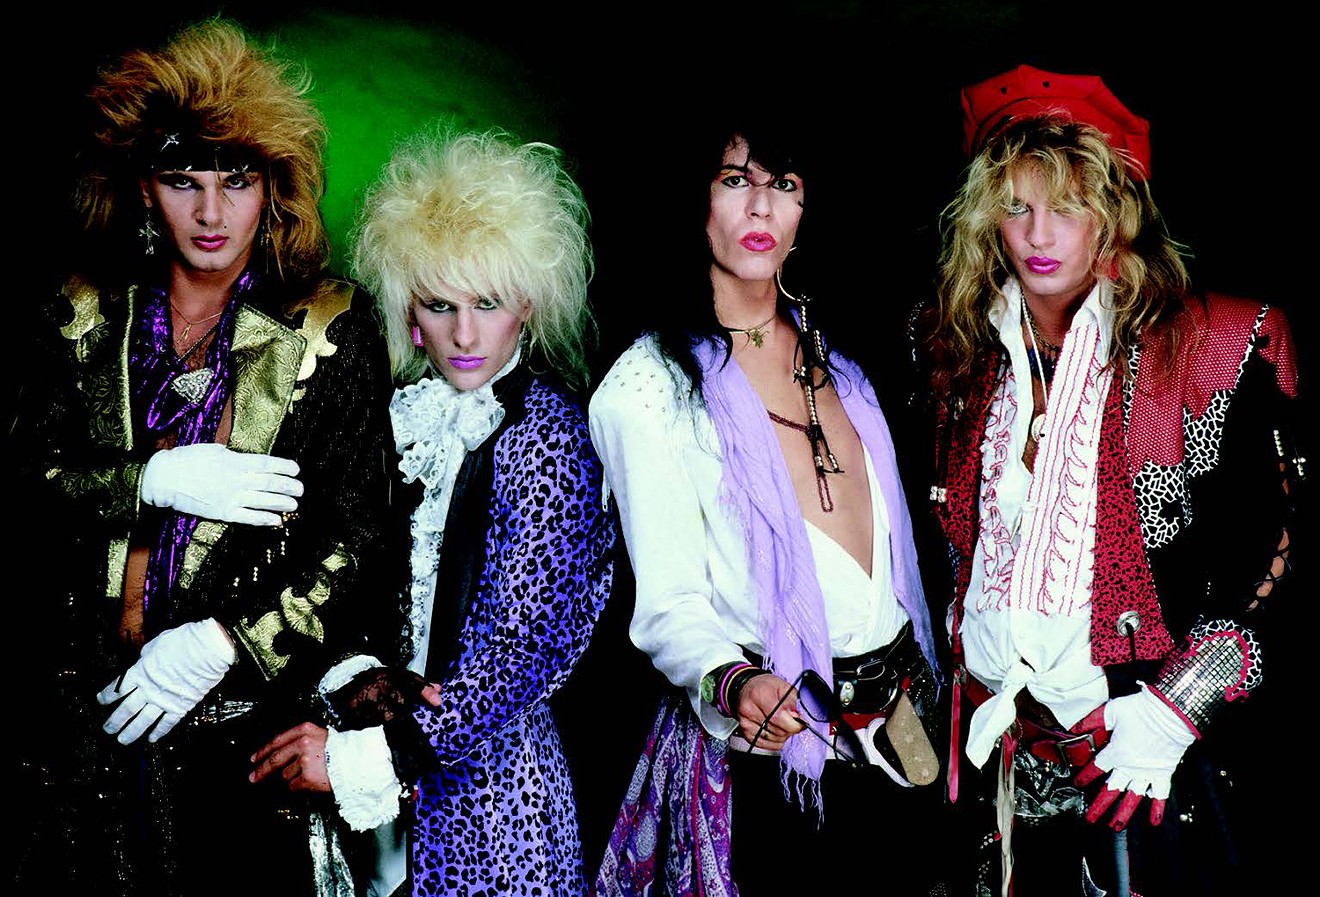 Poison in Los Angeles, CA, 1986. From L to R: Rikki Rockett, C.C. Deville, Bobby Dall, and Bret Michaels.